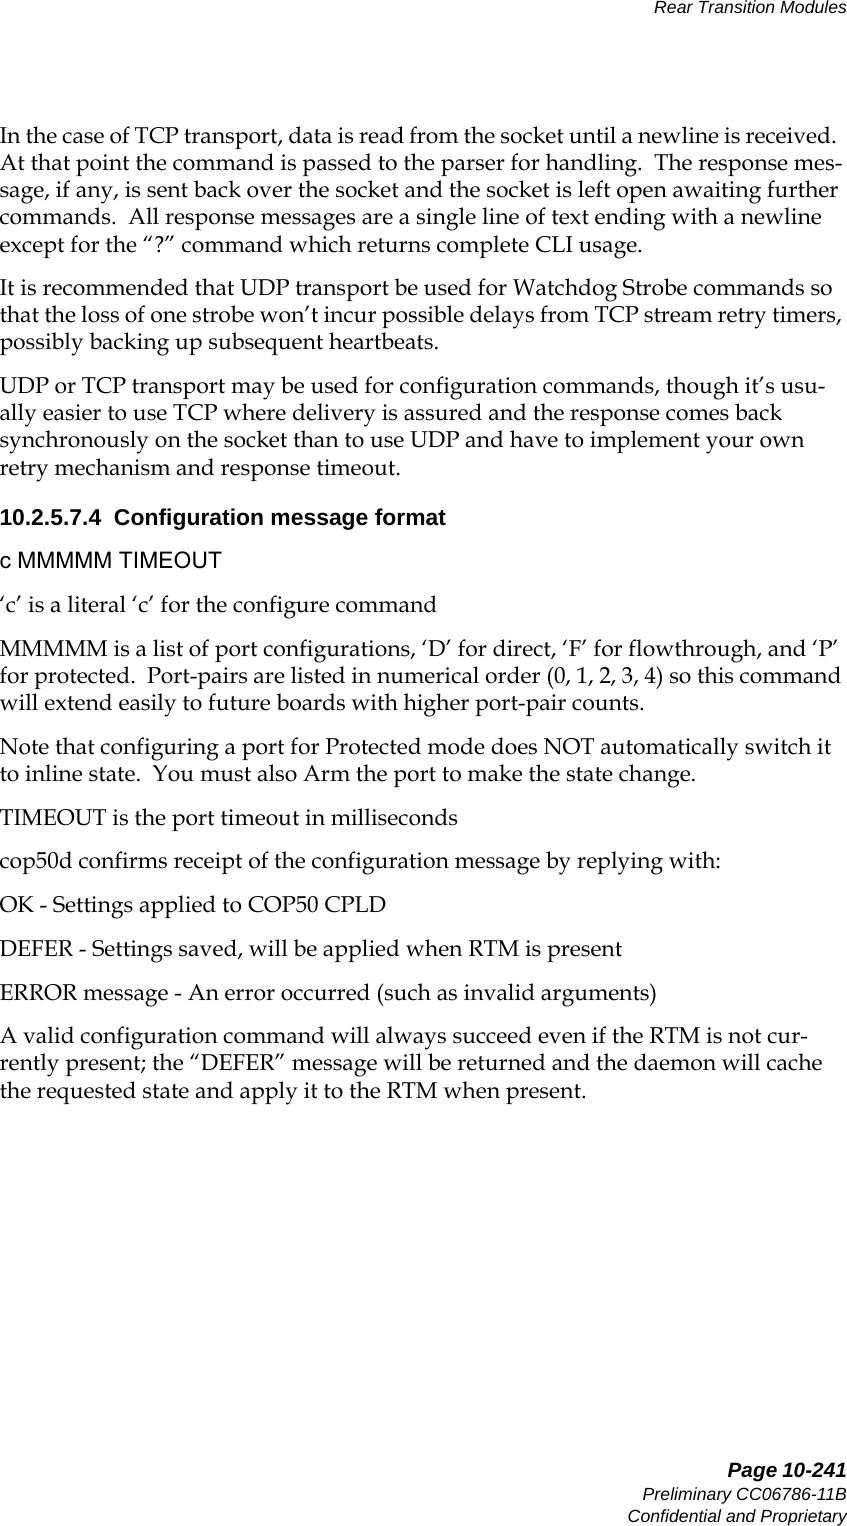   Page 10-241Preliminary CC06786-11BConfidential and ProprietaryRear Transition Modules14ABABPreliminaryIn the case of TCP transport, data is read from the socket until a newline is received.  At that point the command is passed to the parser for handling.  The response mes-sage, if any, is sent back over the socket and the socket is left open awaiting further commands.  All response messages are a single line of text ending with a newline except for the “?” command which returns complete CLI usage.It is recommended that UDP transport be used for Watchdog Strobe commands so that the loss of one strobe won’t incur possible delays from TCP stream retry timers, possibly backing up subsequent heartbeats.UDP or TCP transport may be used for configuration commands, though it’s usu-ally easier to use TCP where delivery is assured and the response comes back synchronously on the socket than to use UDP and have to implement your own retry mechanism and response timeout.10.2.5.7.4  Configuration message formatc MMMMM TIMEOUT‘c’ is a literal ‘c’ for the configure commandMMMMM is a list of port configurations, ‘D’ for direct, ‘F’ for flowthrough, and ‘P’ for protected.  Port-pairs are listed in numerical order (0, 1, 2, 3, 4) so this command will extend easily to future boards with higher port-pair counts.Note that configuring a port for Protected mode does NOT automatically switch it to inline state.  You must also Arm the port to make the state change.TIMEOUT is the port timeout in millisecondscop50d confirms receipt of the configuration message by replying with:  OK - Settings applied to COP50 CPLDDEFER - Settings saved, will be applied when RTM is presentERROR message - An error occurred (such as invalid arguments)A valid configuration command will always succeed even if the RTM is not cur-rently present; the “DEFER” message will be returned and the daemon will cache the requested state and apply it to the RTM when present.